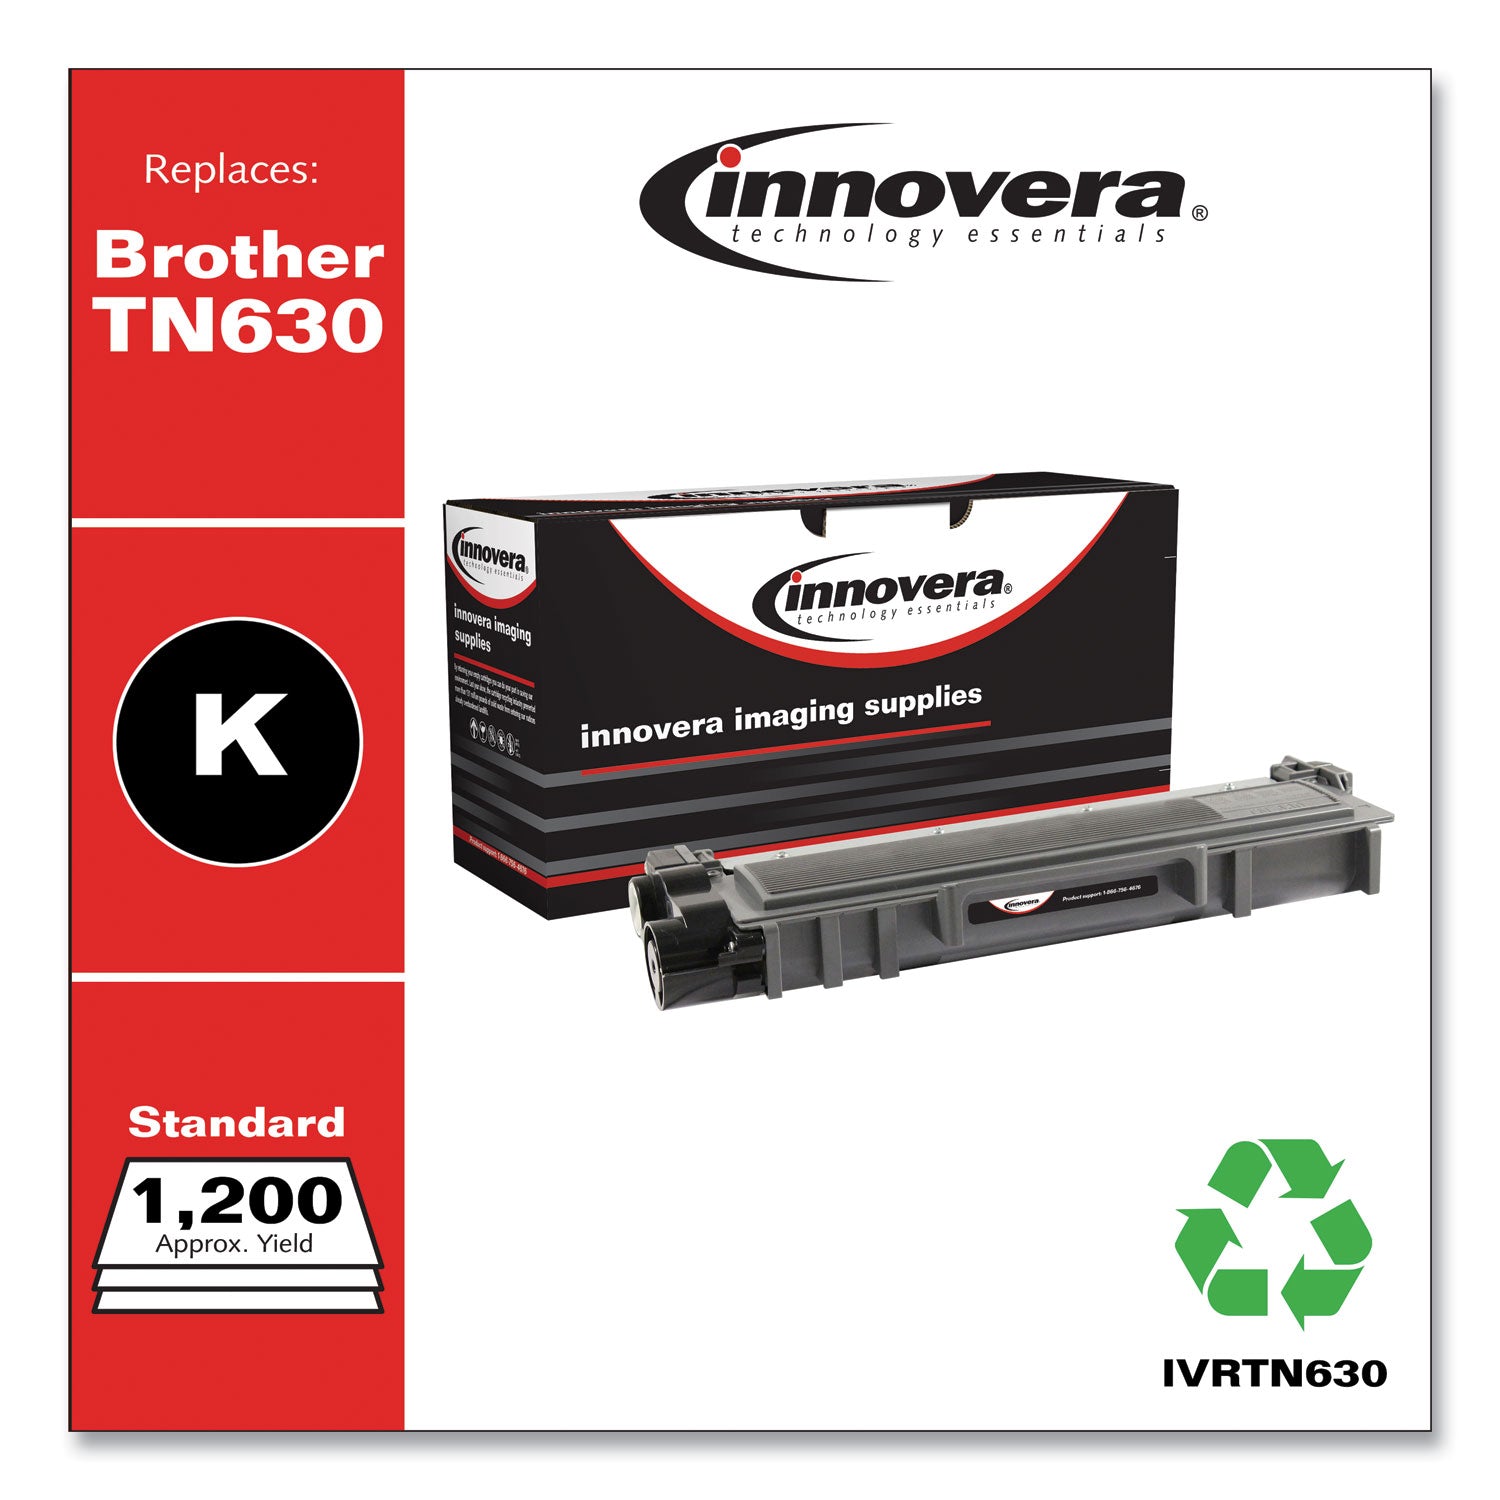 remanufactured-black-toner-replacement-for-tn630-1200-page-yield_ivrtn630 - 2